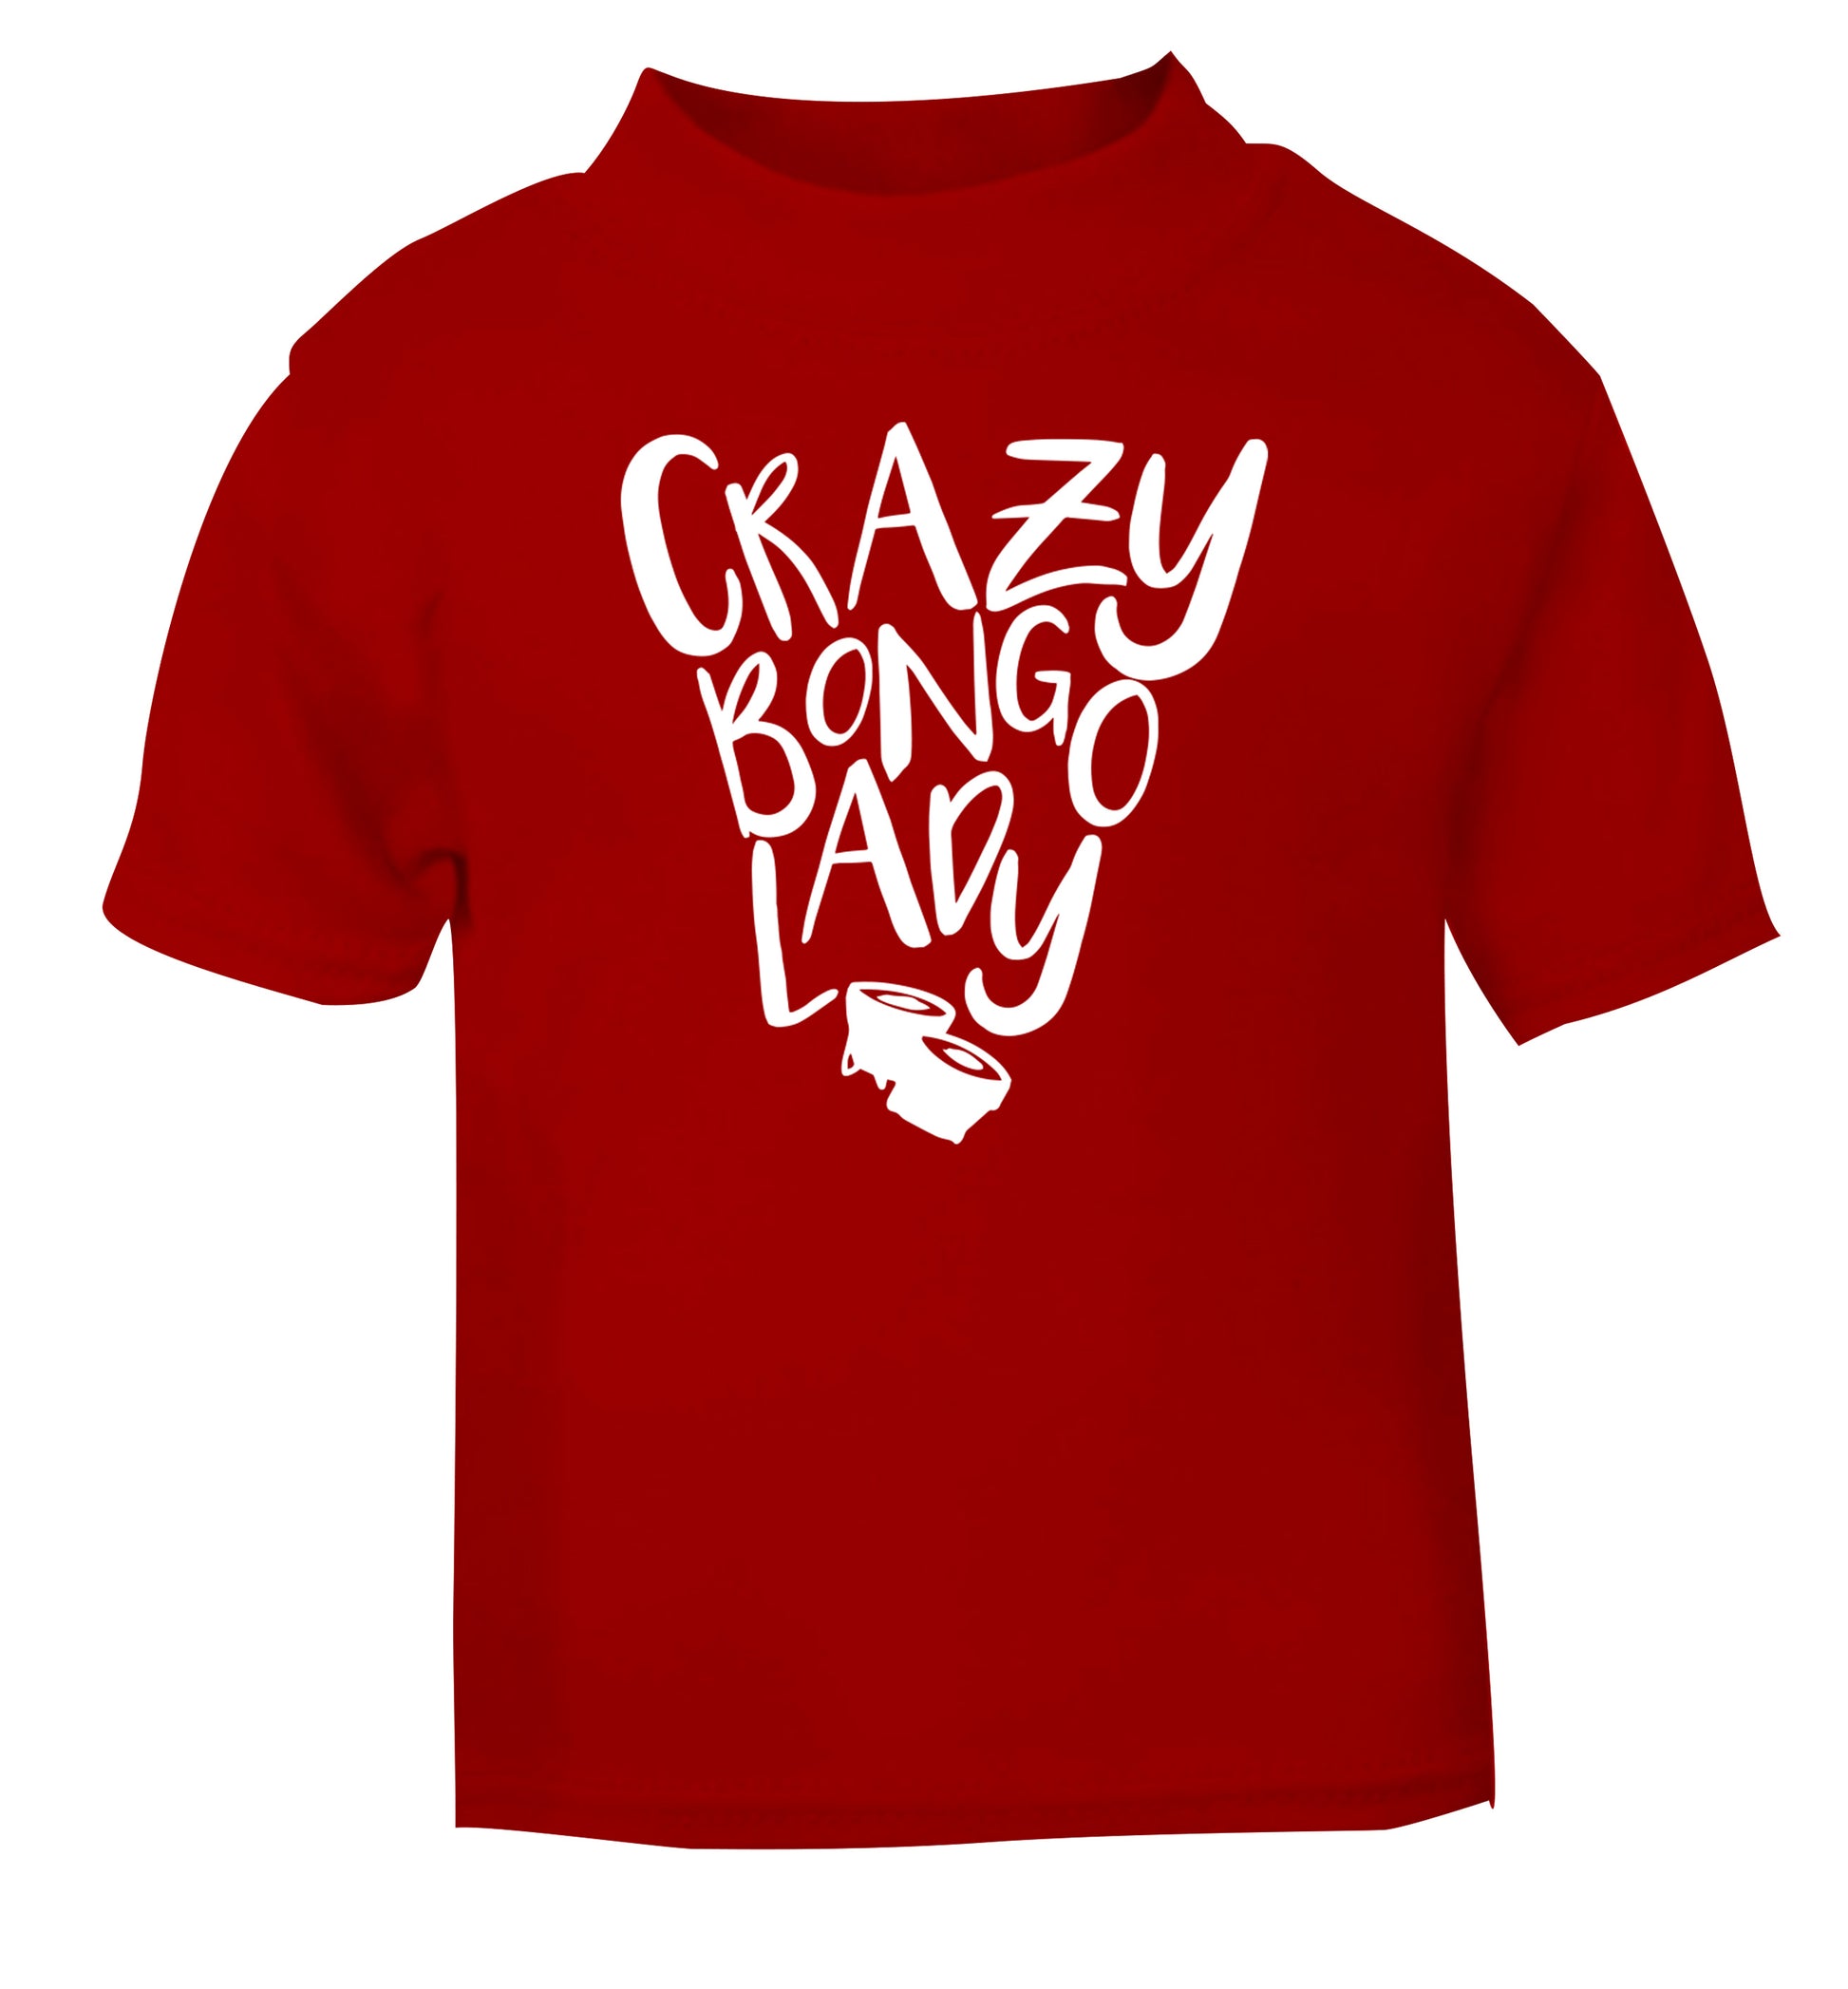 Crazy bongo lady red Baby Toddler Tshirt 2 Years